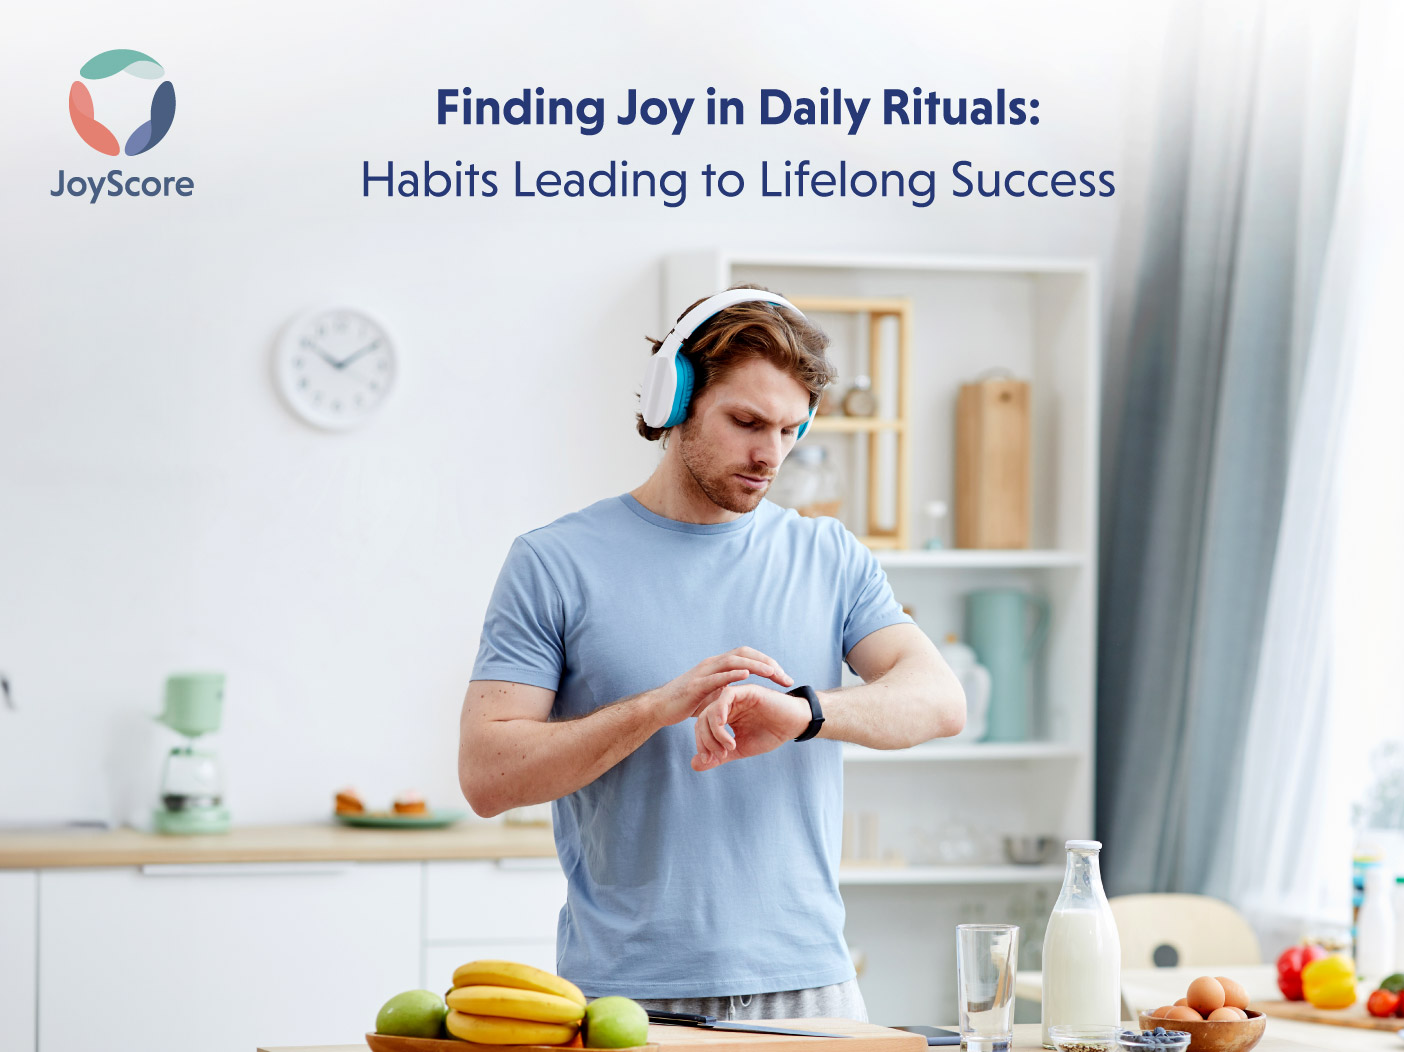 Finding Joy In Daily Rituals: How Small Habits Can Lead To Lifelong Success